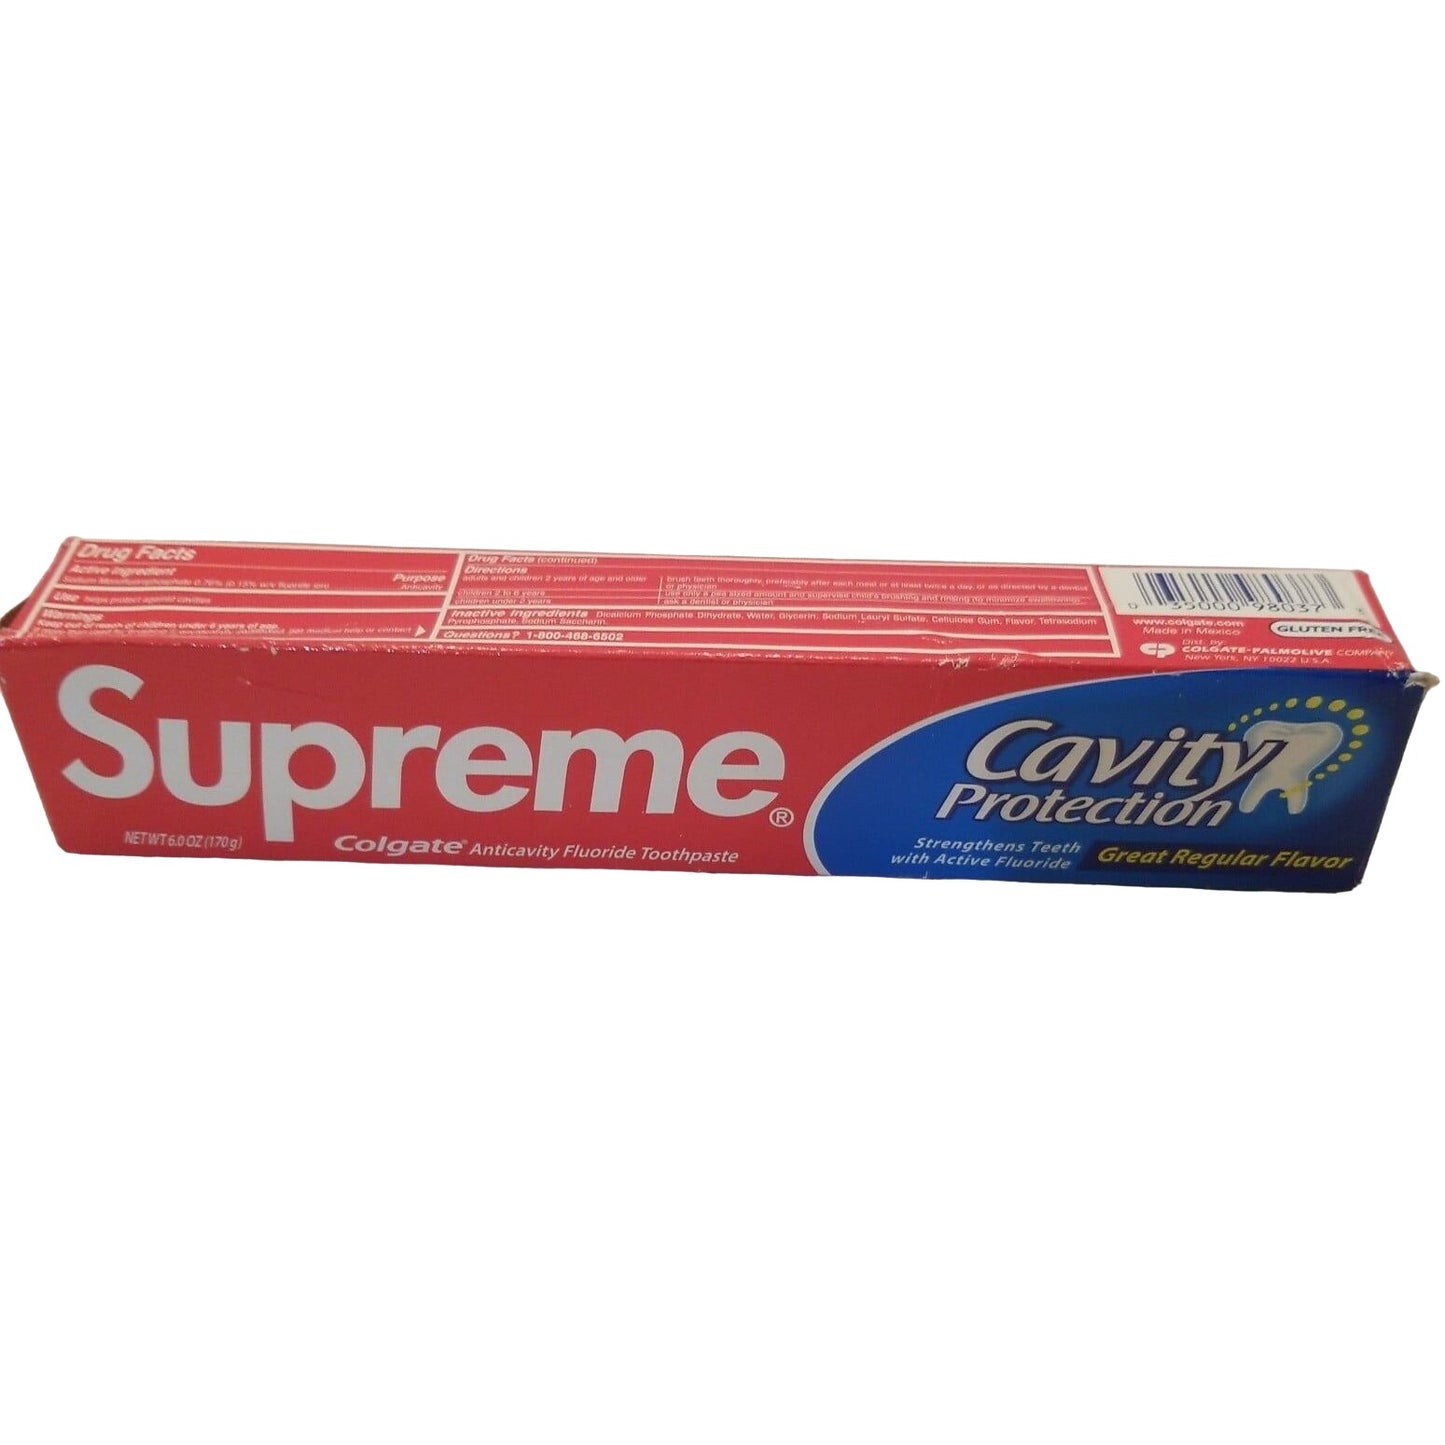 Supreme/Colgate Tooth Paste Collectable